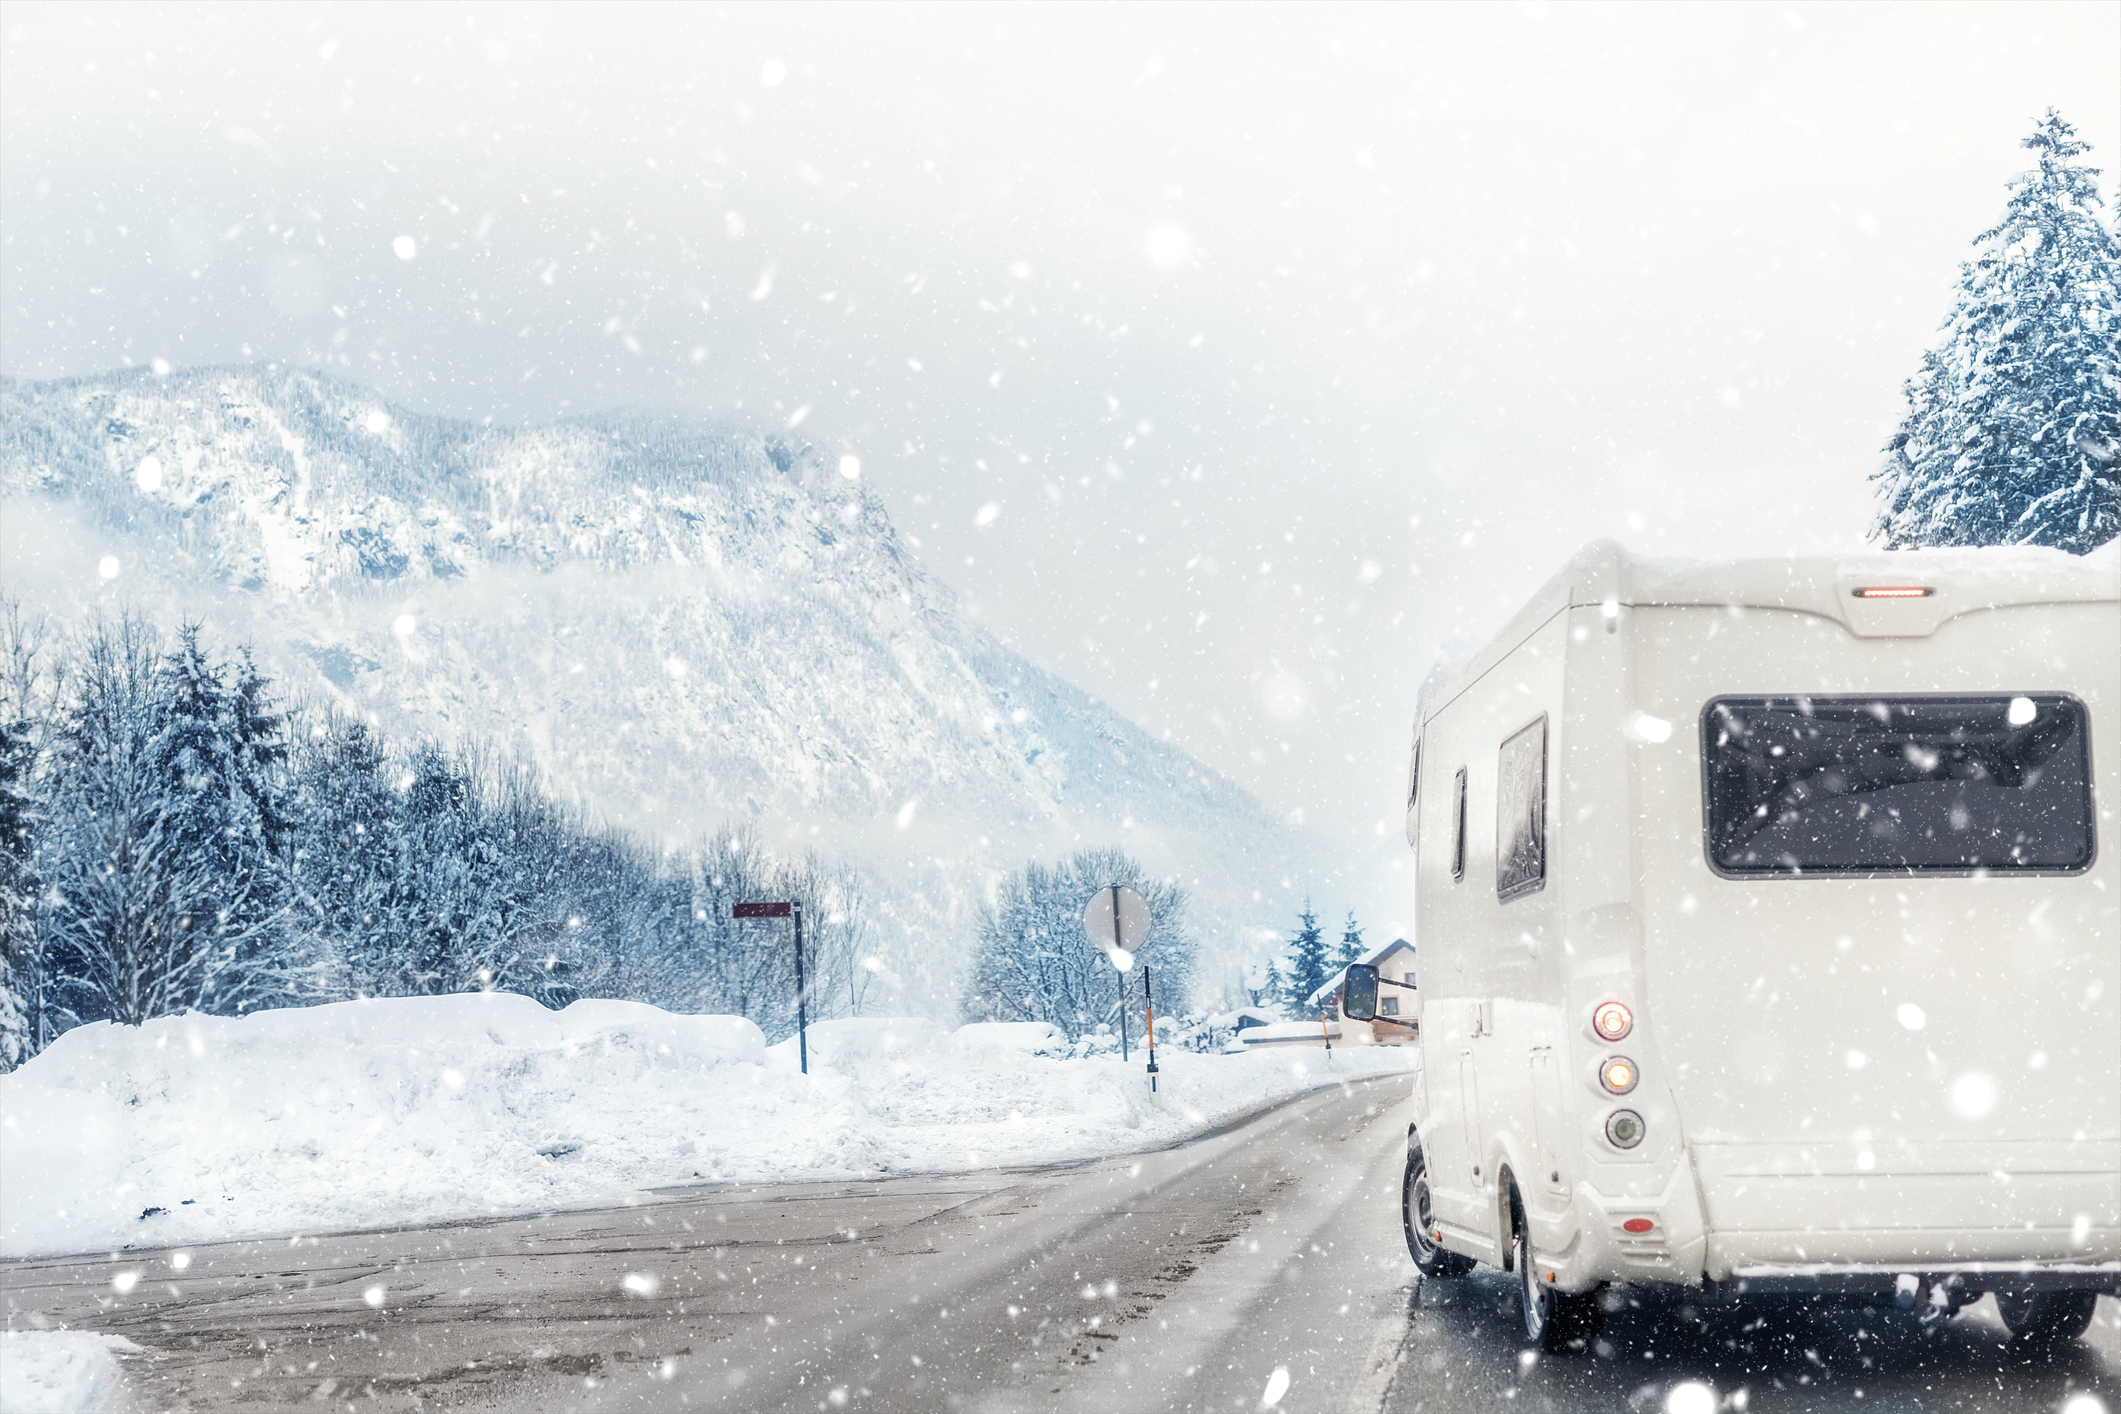 How To Keep Warm In The Winter In an RV Without Electricity! 